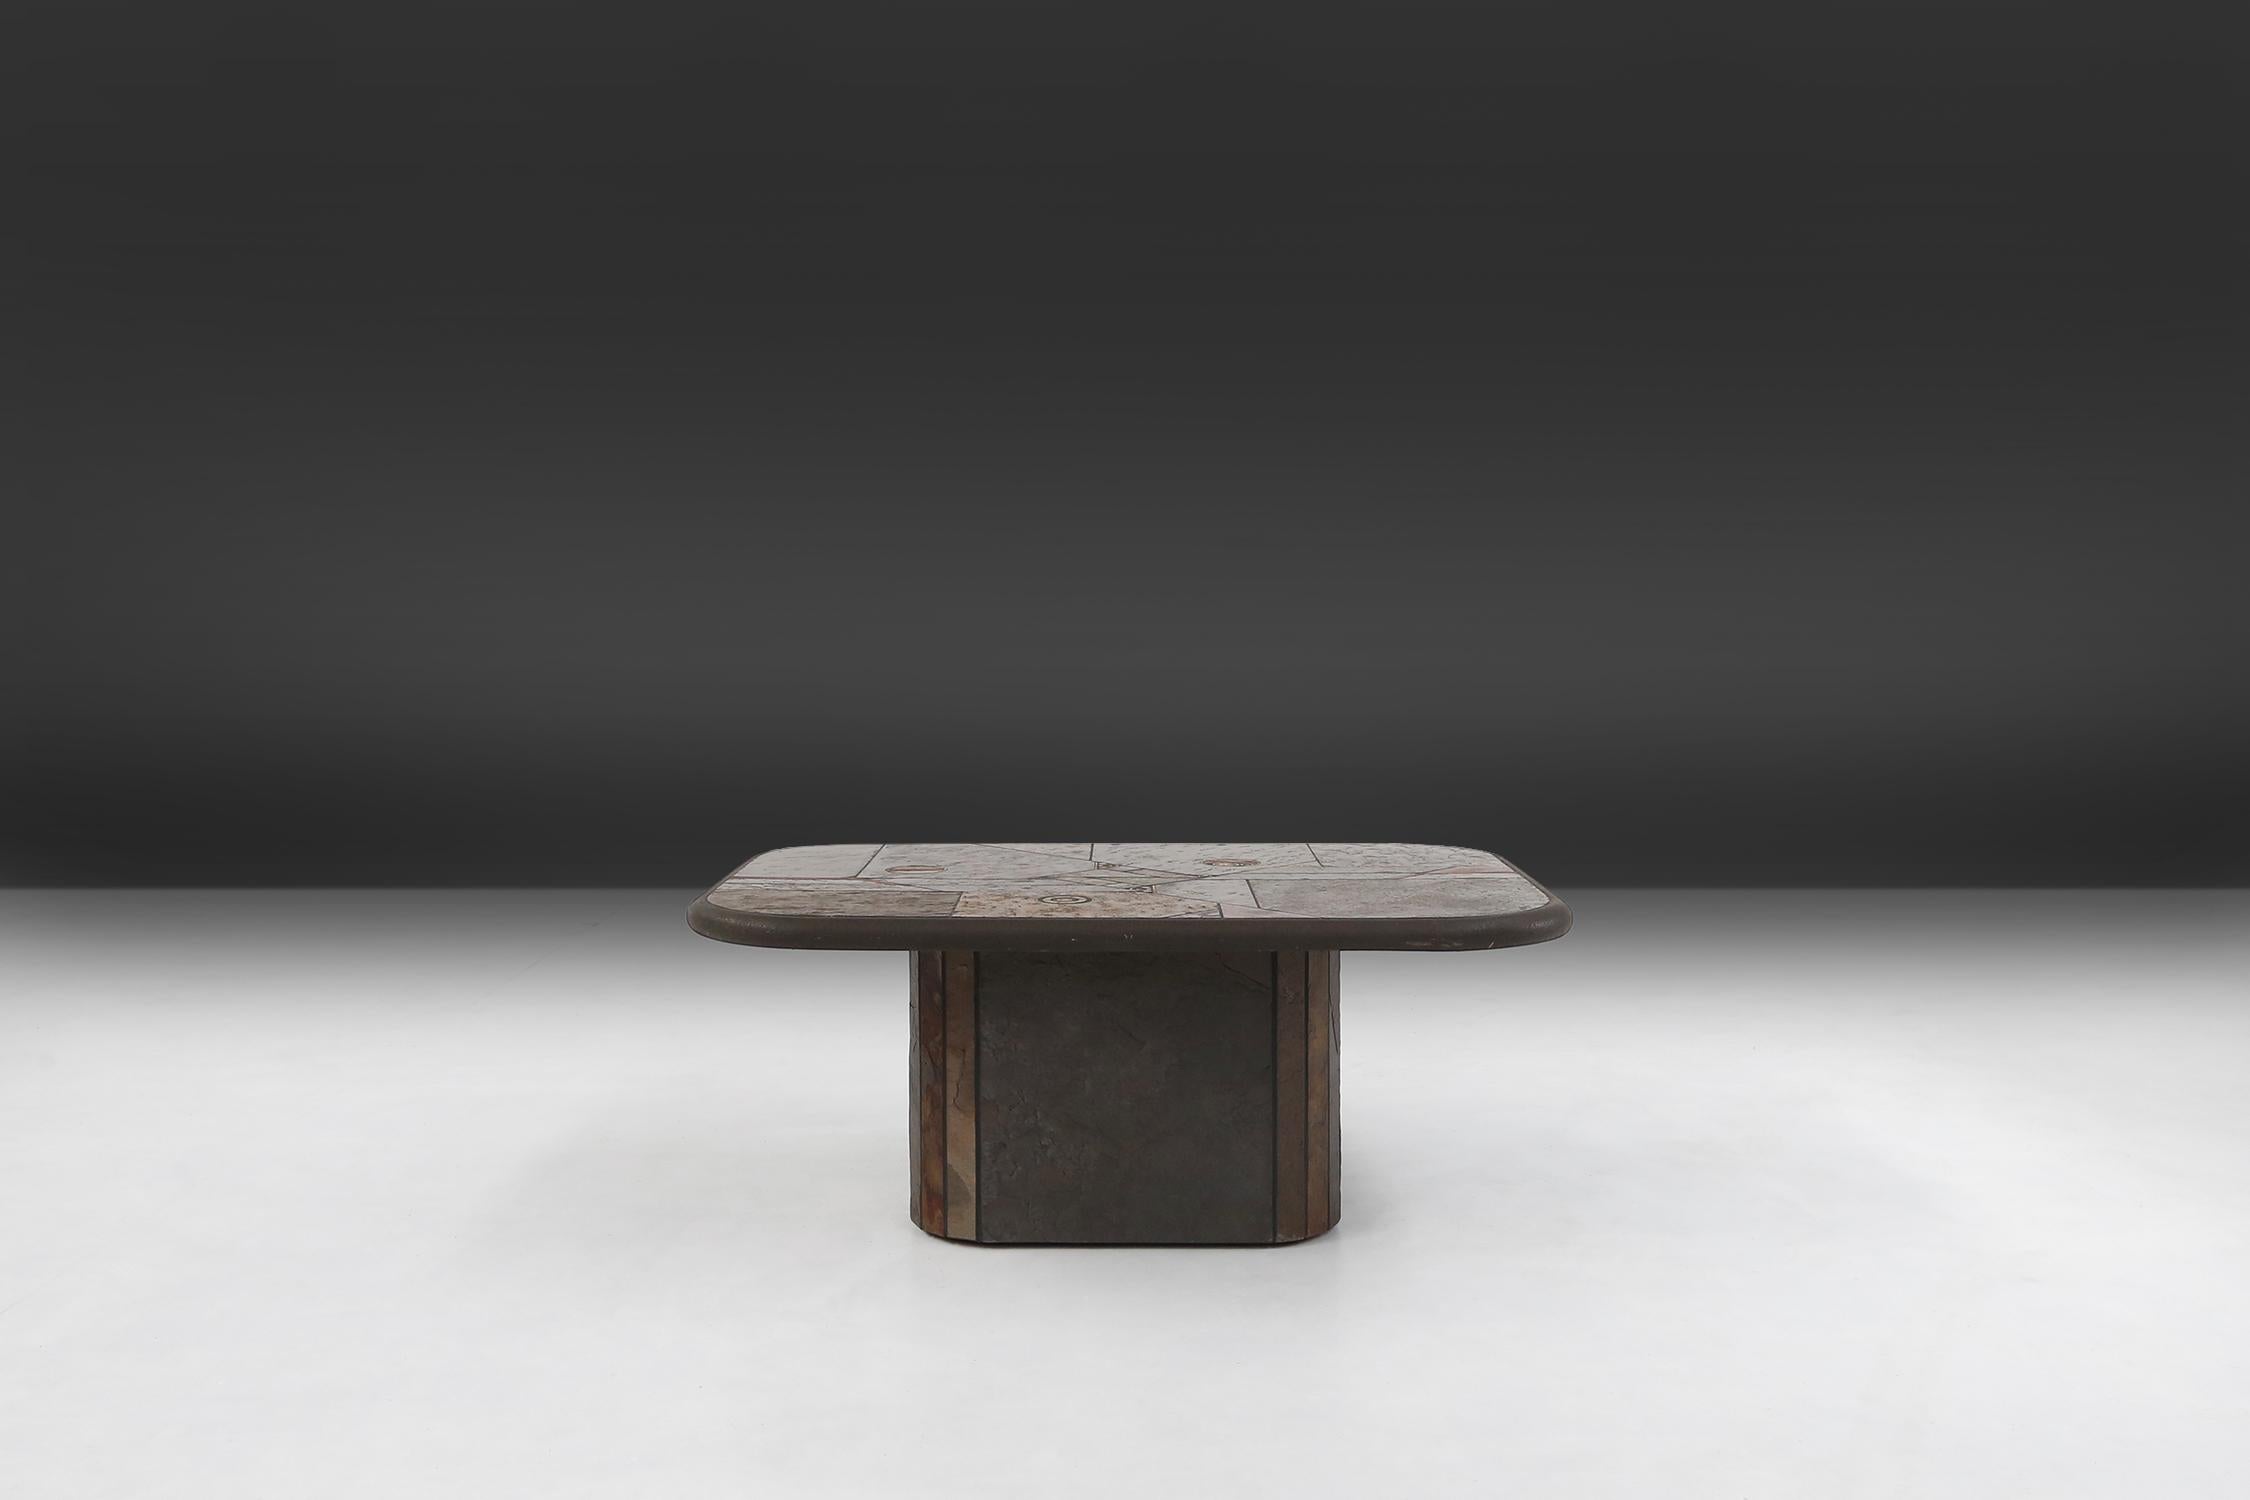 Coffee table made an designed by the dutch artist Paul Kingma.
All of his coffee tables he hand made with materials he gathered during his travels around the world, are now being considered as highly collectible.
Made of slate stone, brass details